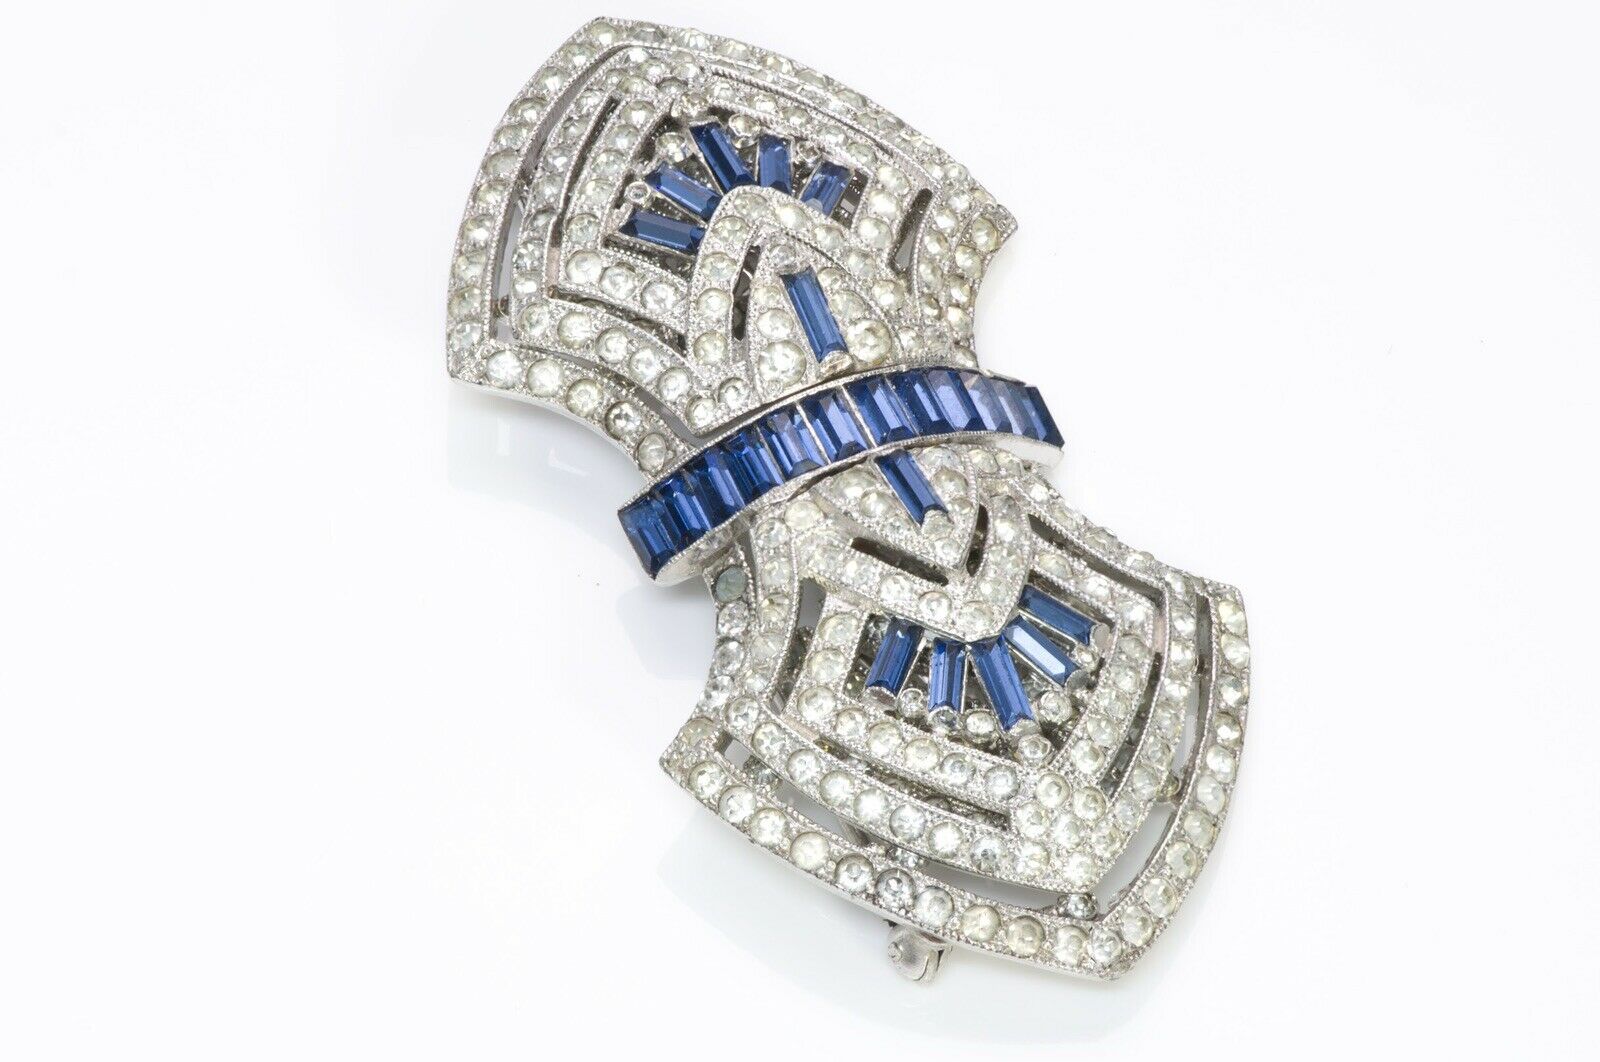 Coro Duette 1940’s Art Deco Style Blue Crystal Clips Brooch